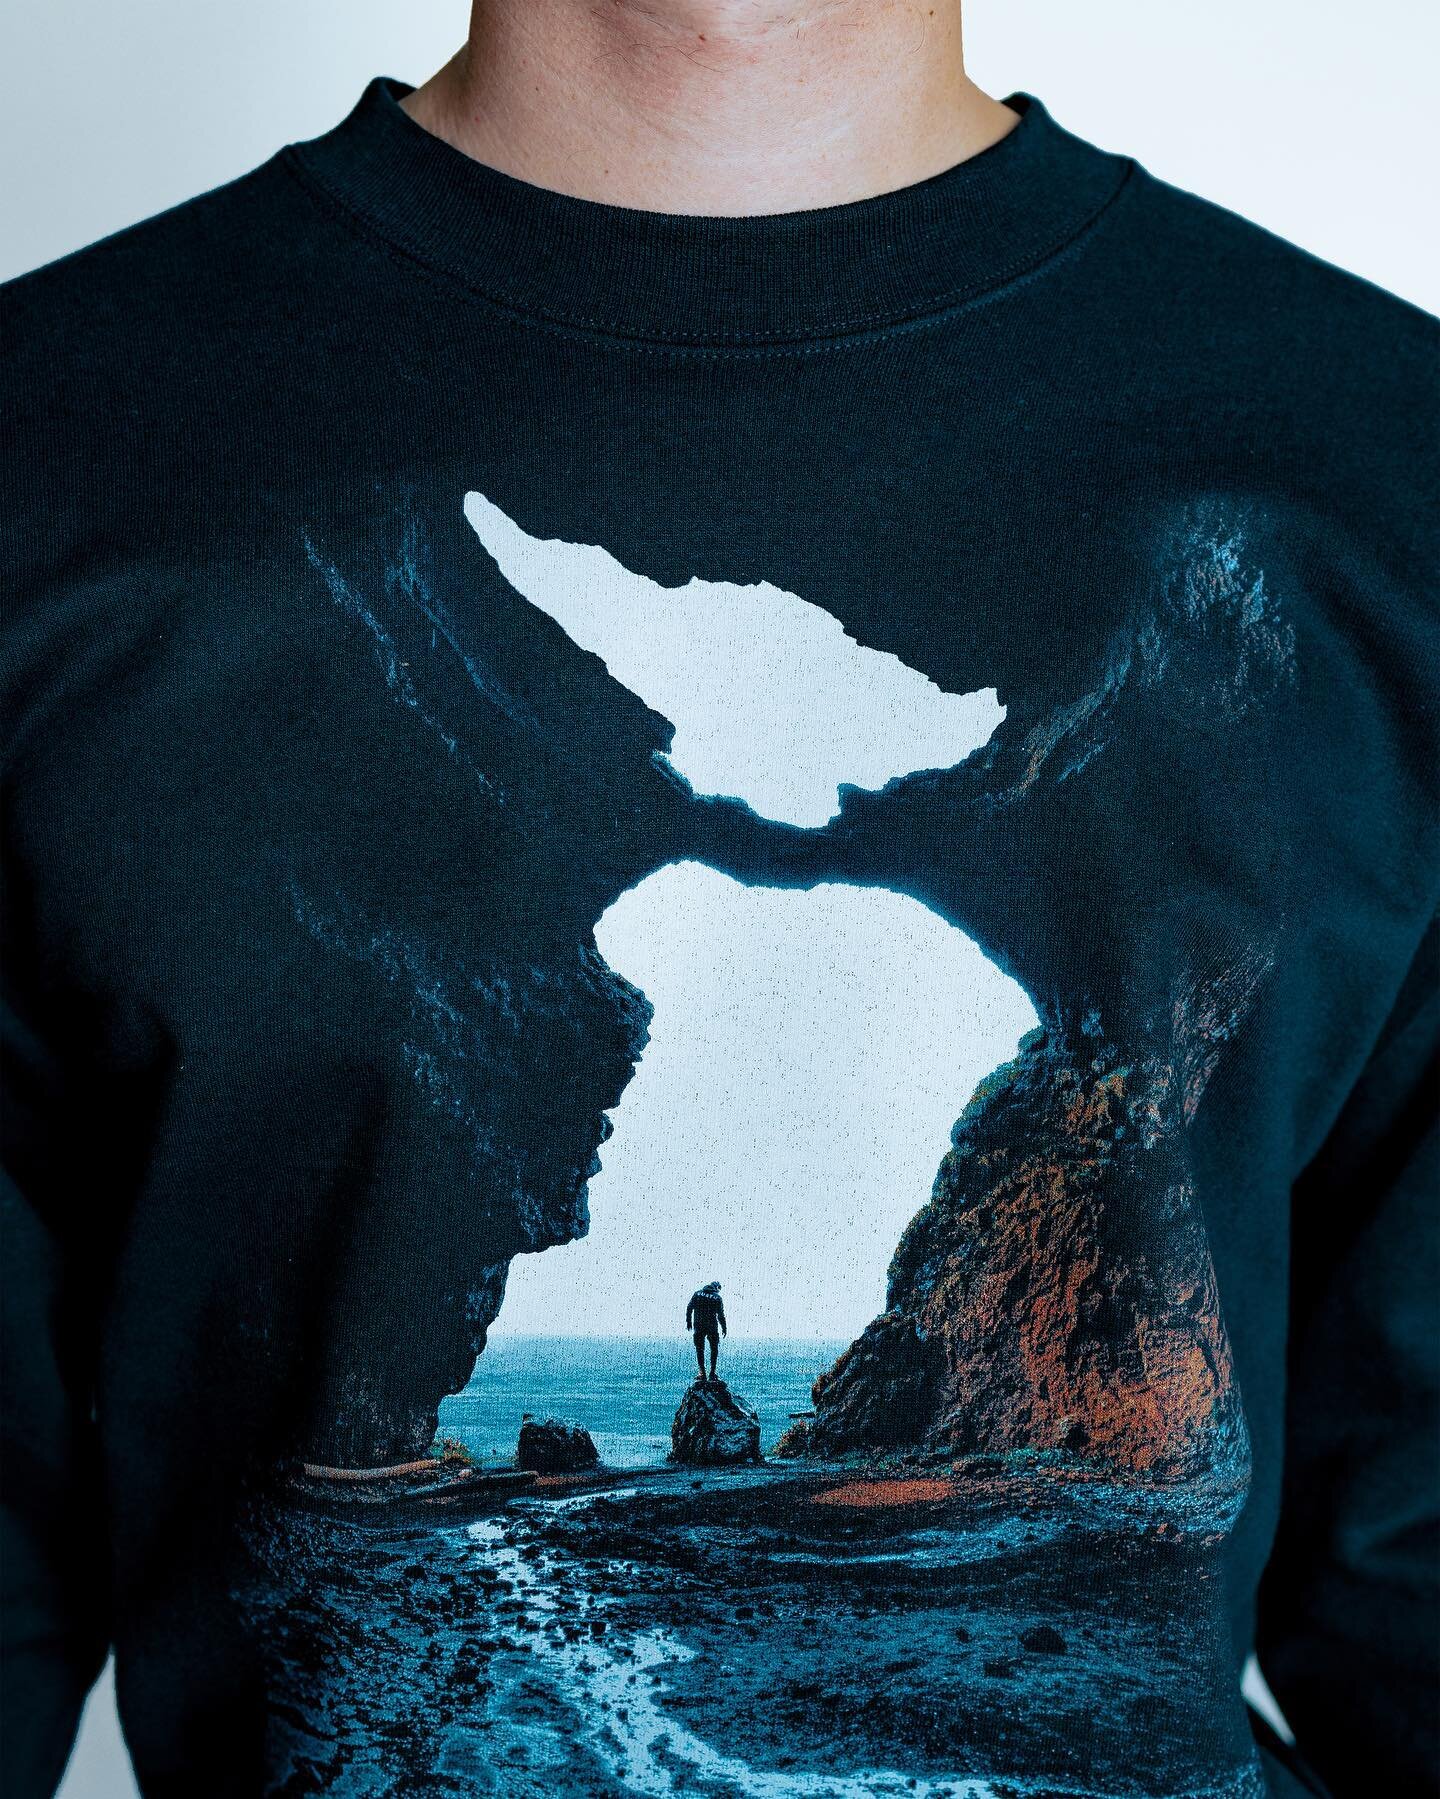 May the 4th be with you! 🤓 
We&rsquo;ve got a crewneck for just the occasion. The Yoda Cave Crewneck was photographed by @chrishenry in southern Iceland in a cave silhouette oddly resembling our favorite little green Jedi master. Available on our we